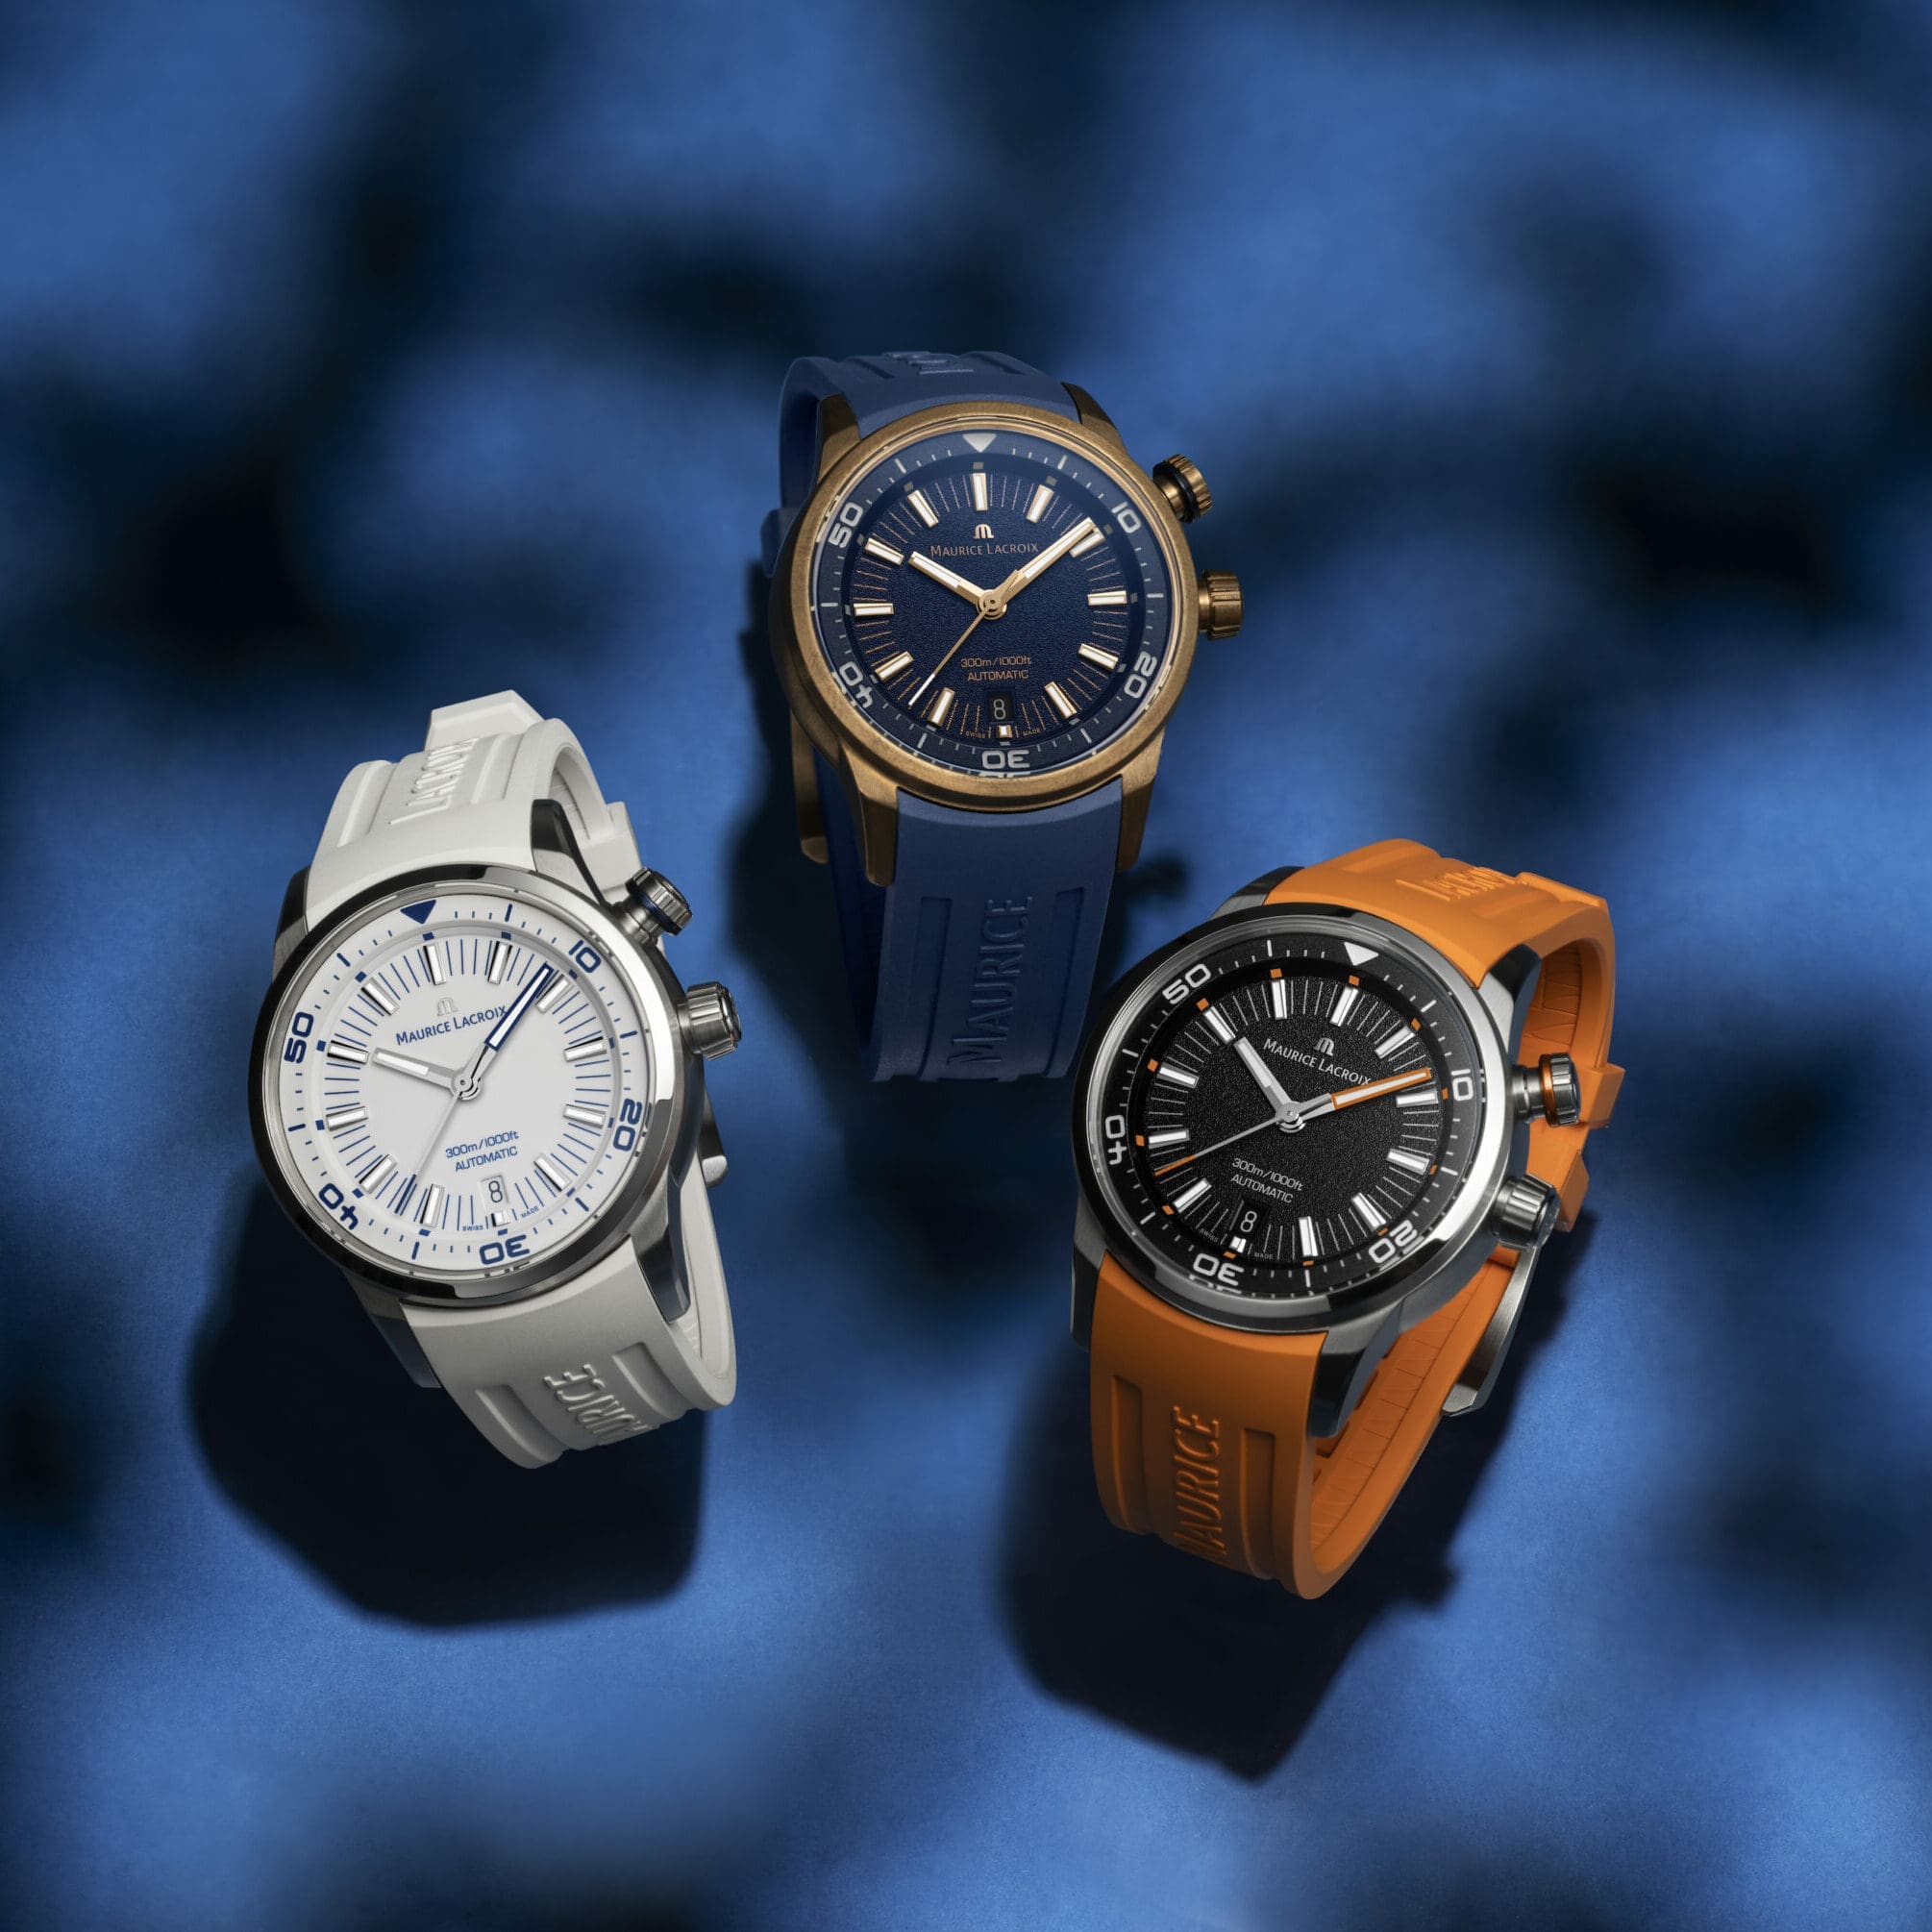 Maurice Lacroix presents the new Pontos S Diver in proper Mediterranean fashion